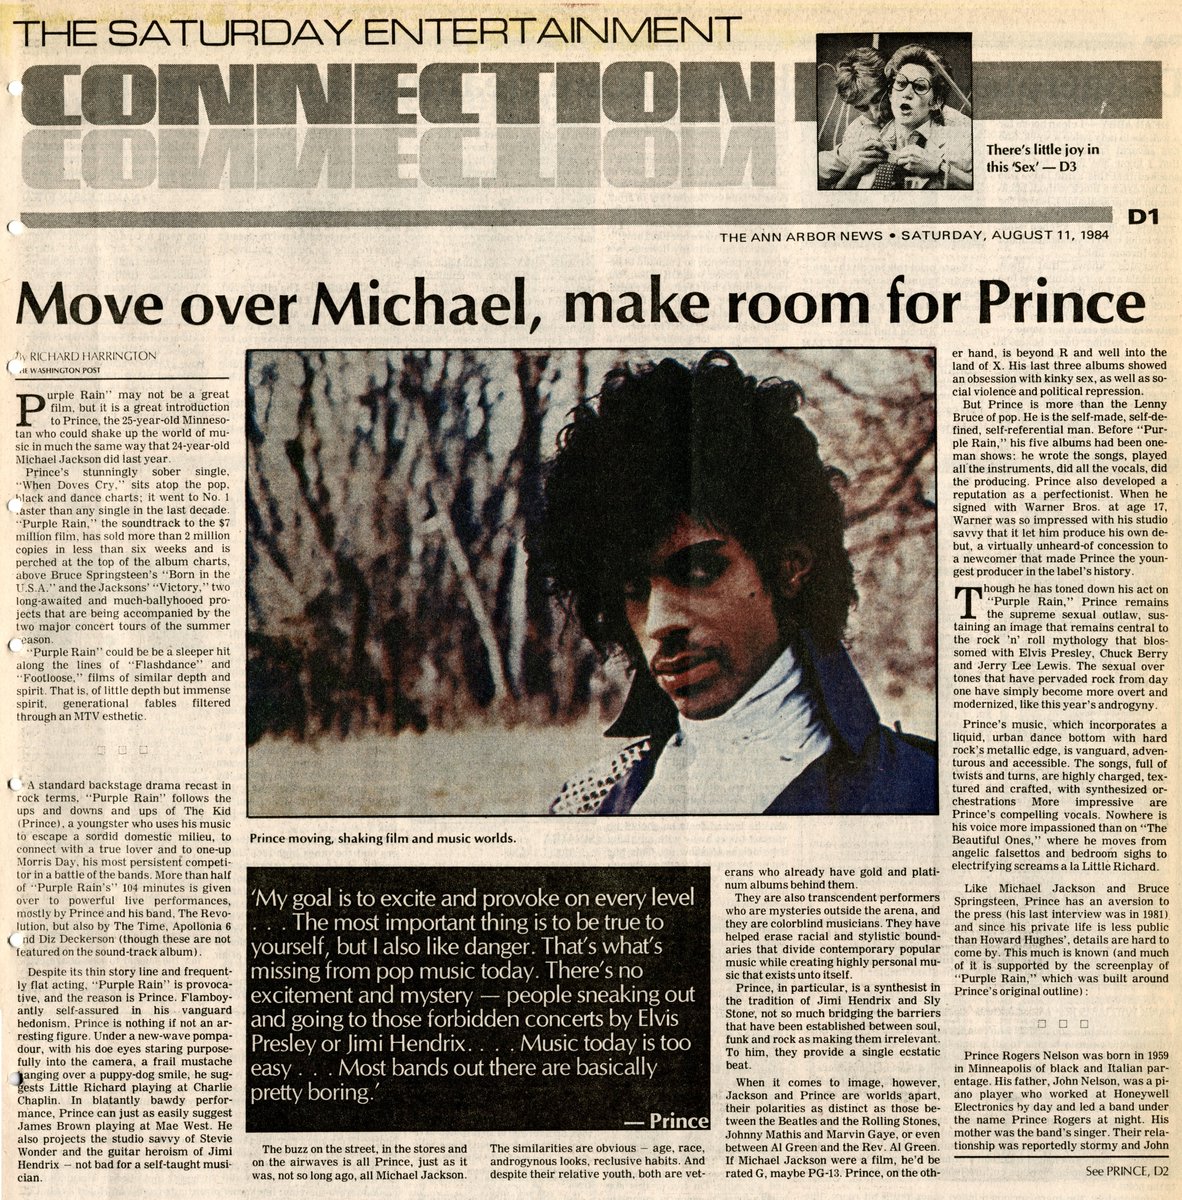 @KhutsoRapudi @Nasheswetti @lowellnash Prince grew up watching the J5, 1999‘s singles only got success after MJ broke down the barrier with Thriller, his label promoted him as the 'anti-MJ', Purple Rain wouldn’t be what it was without MJ. He benefited heavily from MJ‘s existence.